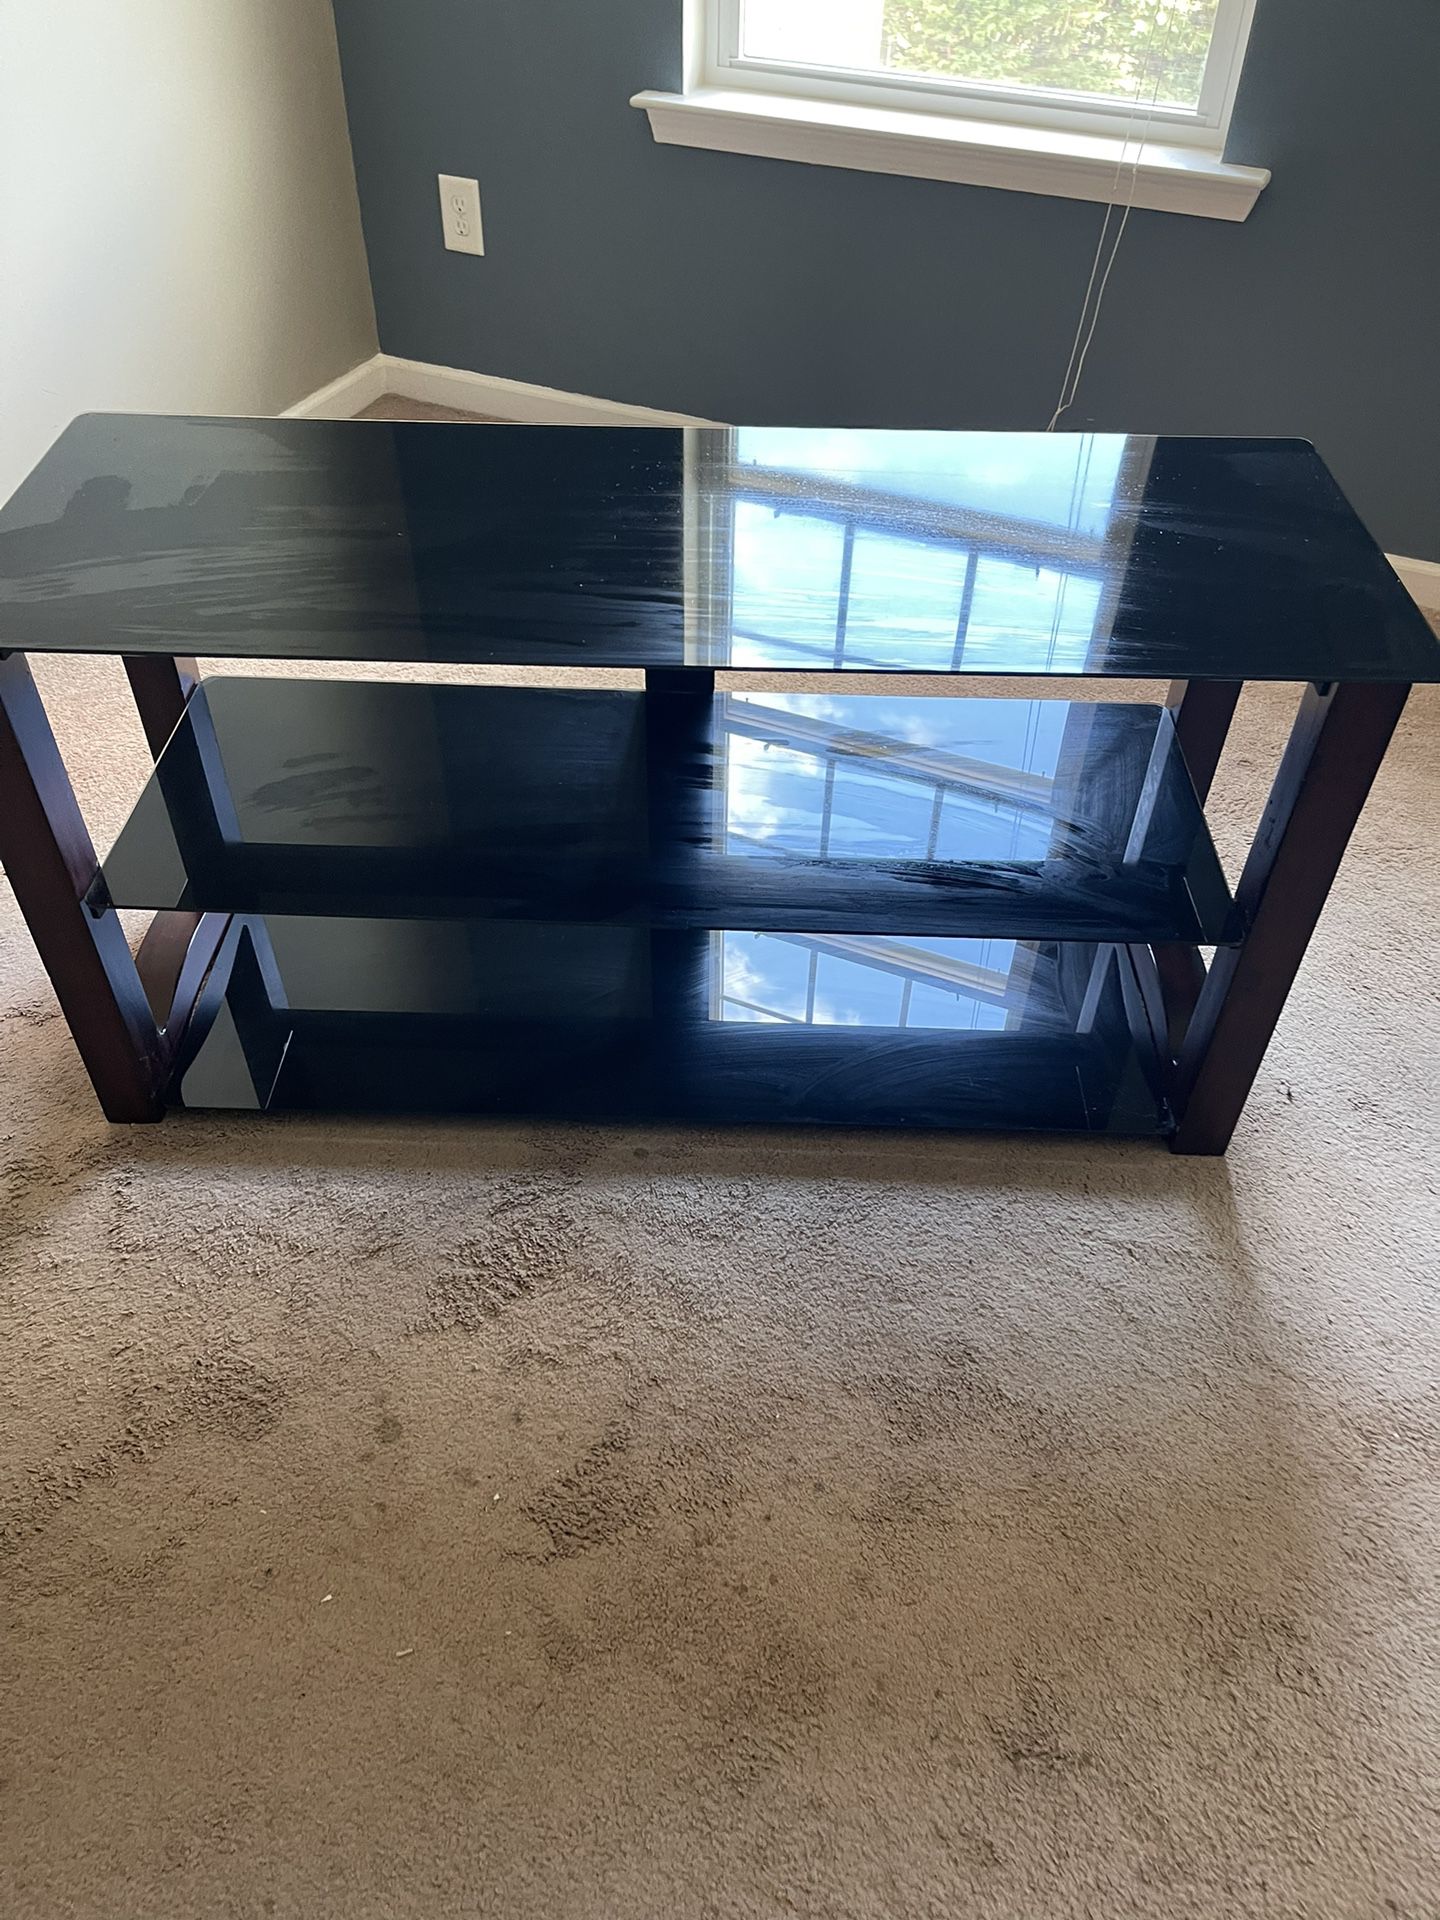 TV Stand Fits 50” - 60” Comfortably 